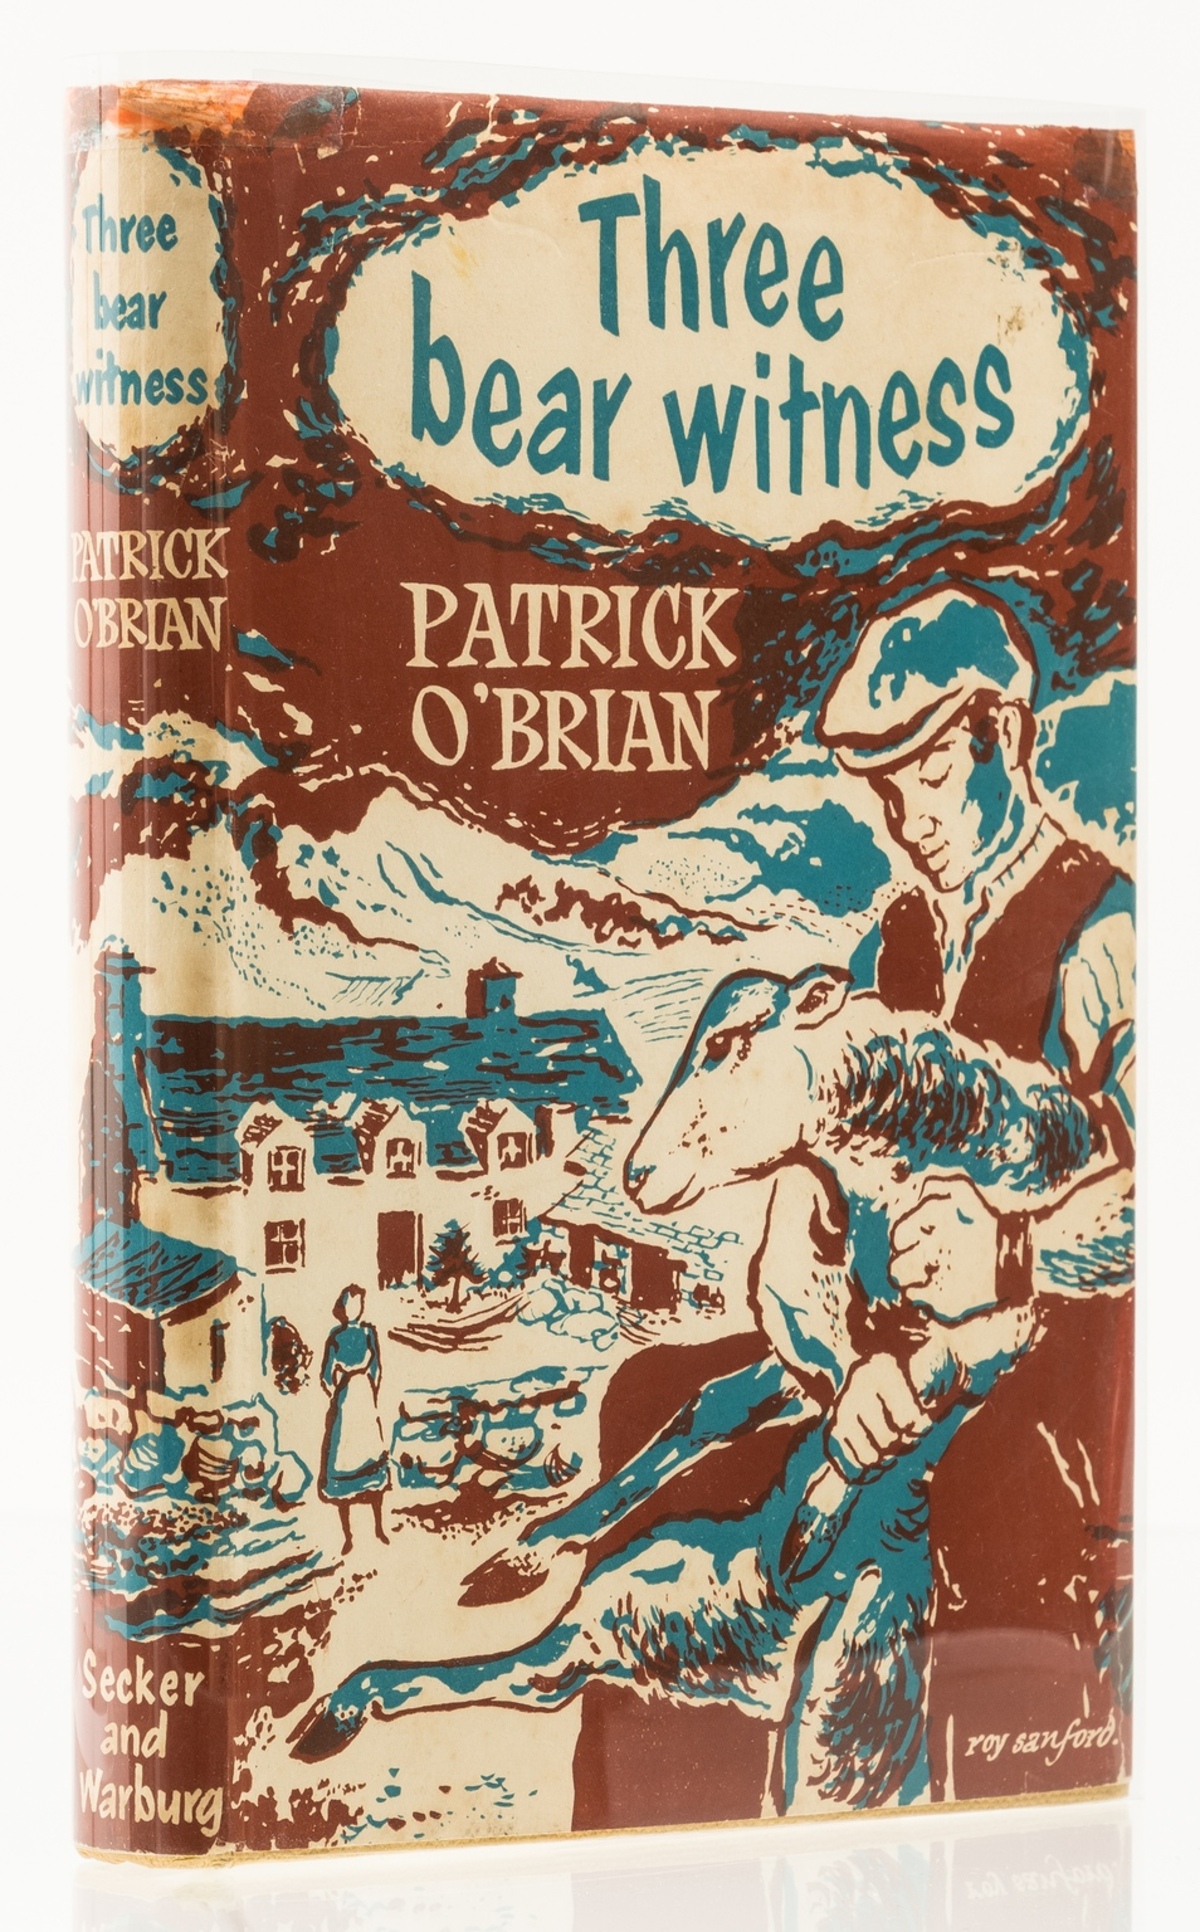 O'Brian (Patrick) Three Bear Witness, first edition, signed by the author, 1952.